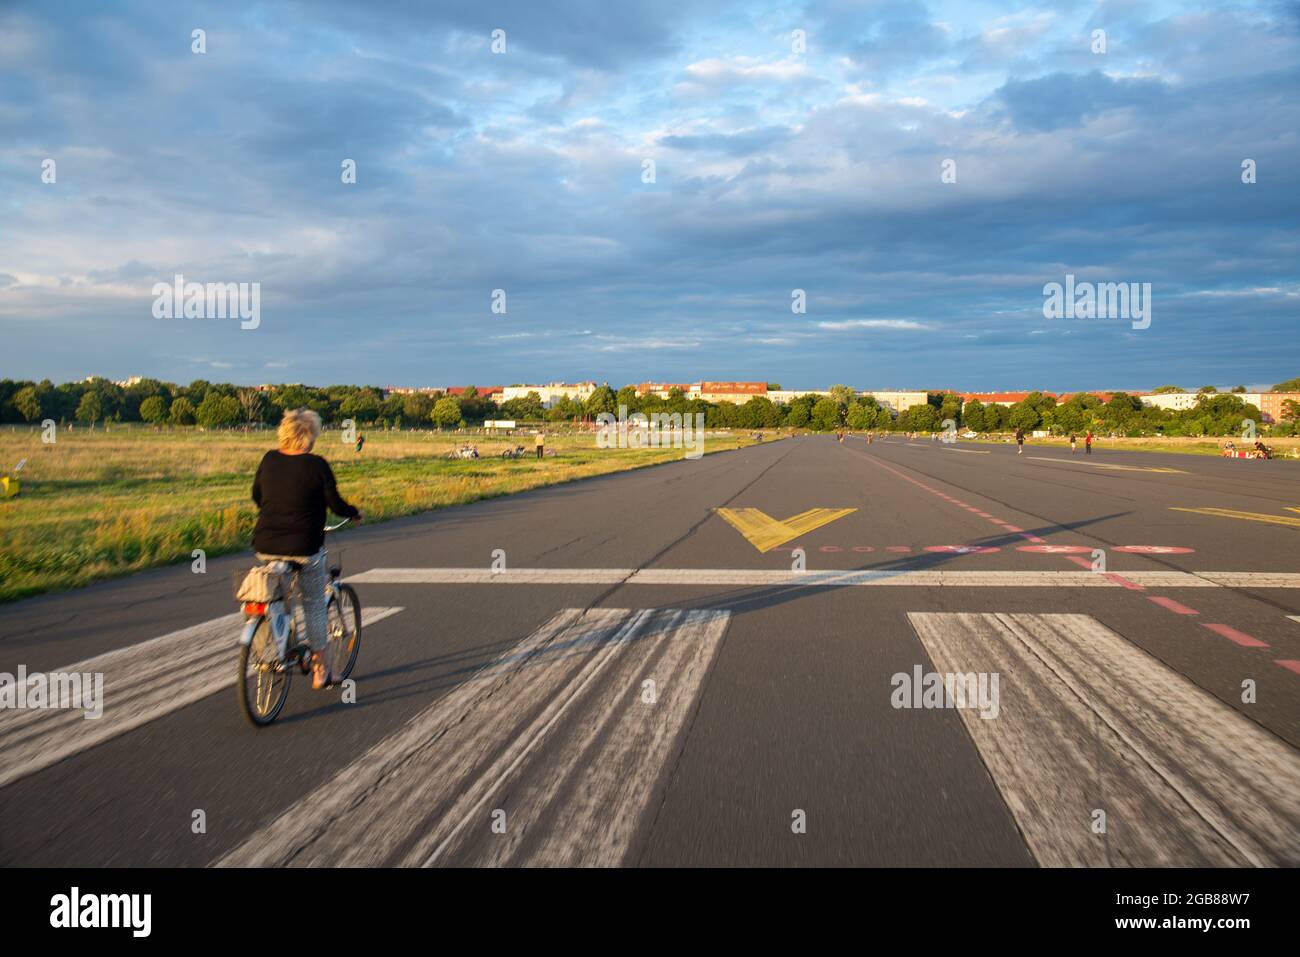 cyclists at former airport Tempelhof in Berlin, Germany Stock Photo